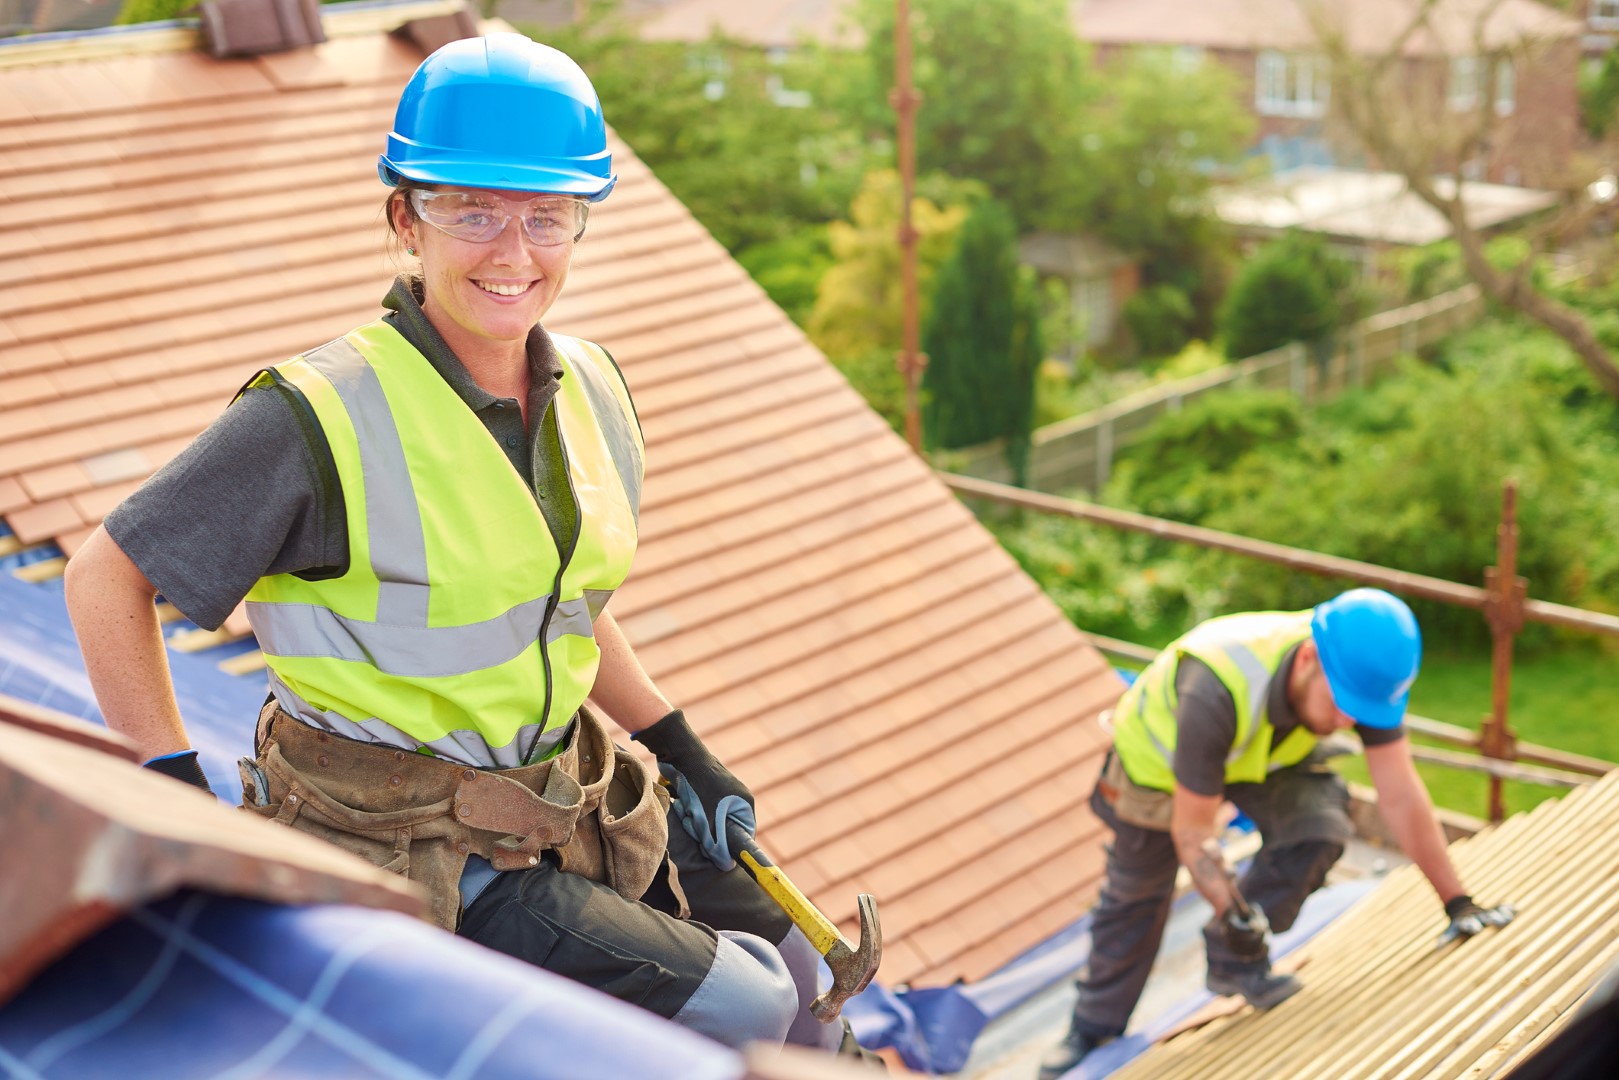 female roofer replacing roof tiles